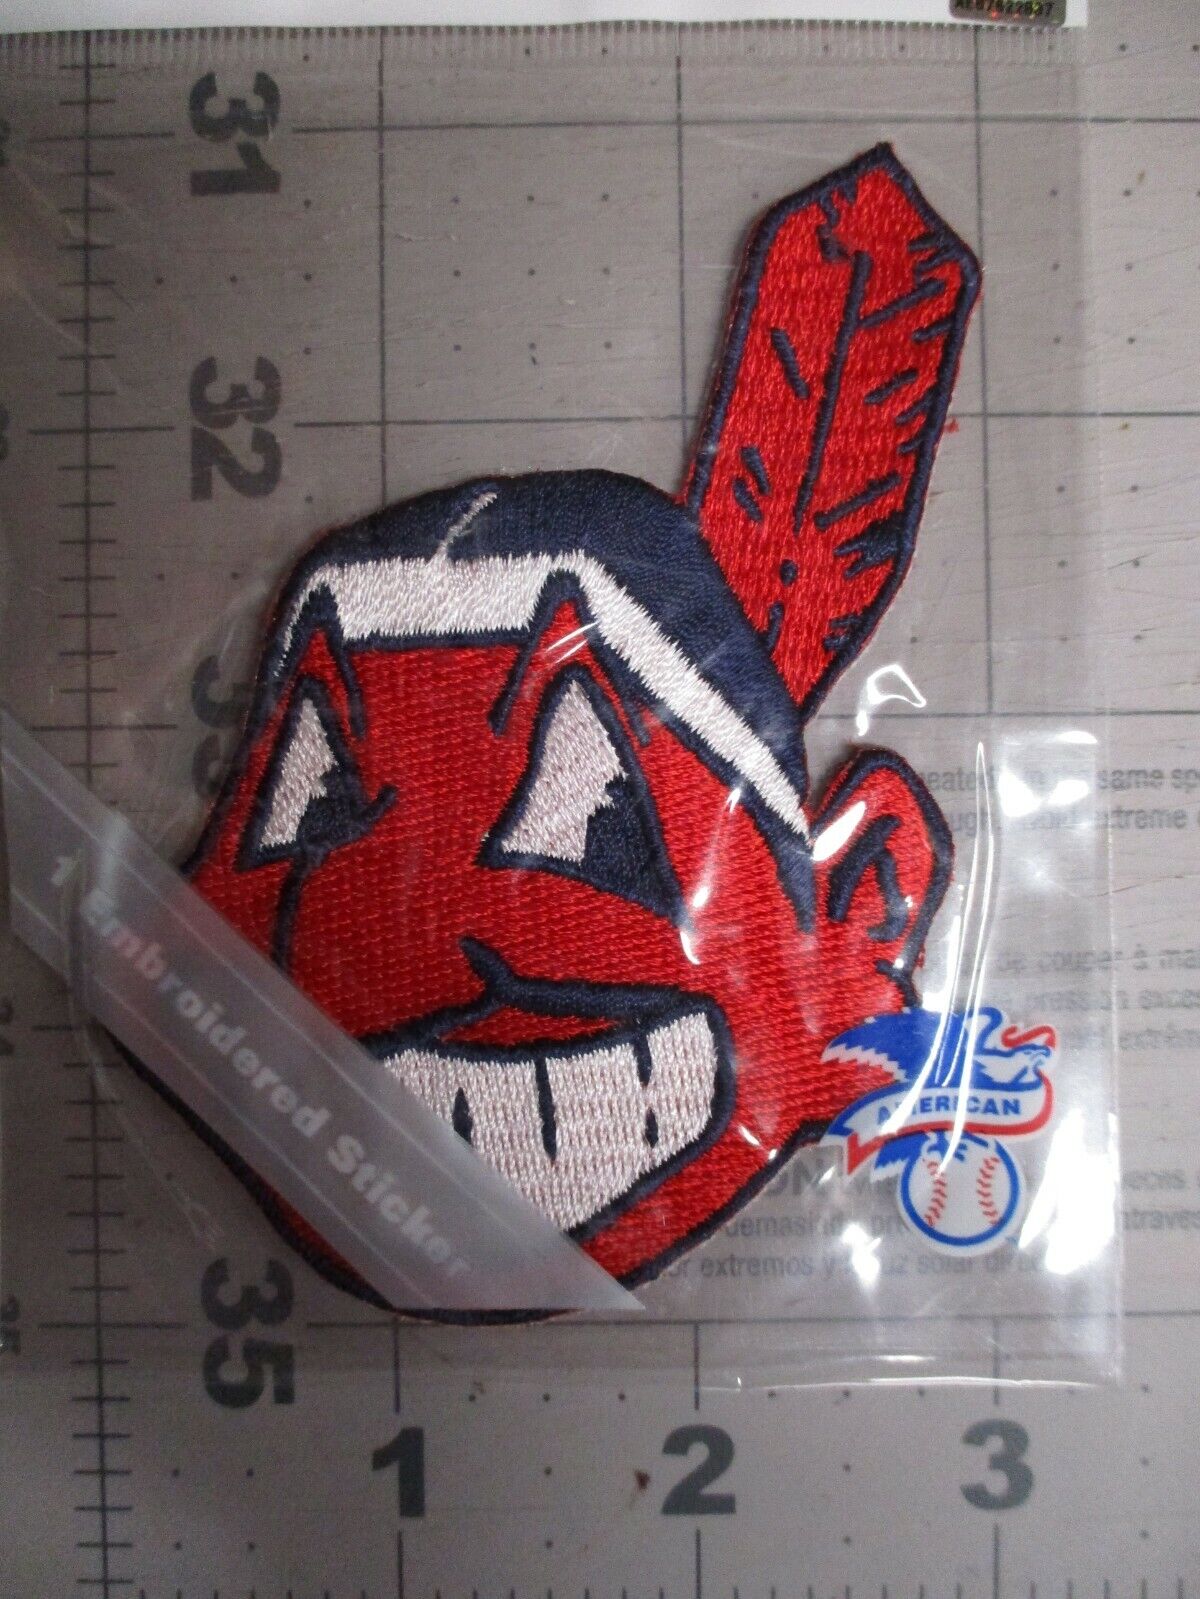 Cleveland Indians Chief Wahoo patch size 3 x 4 inches New in Bag